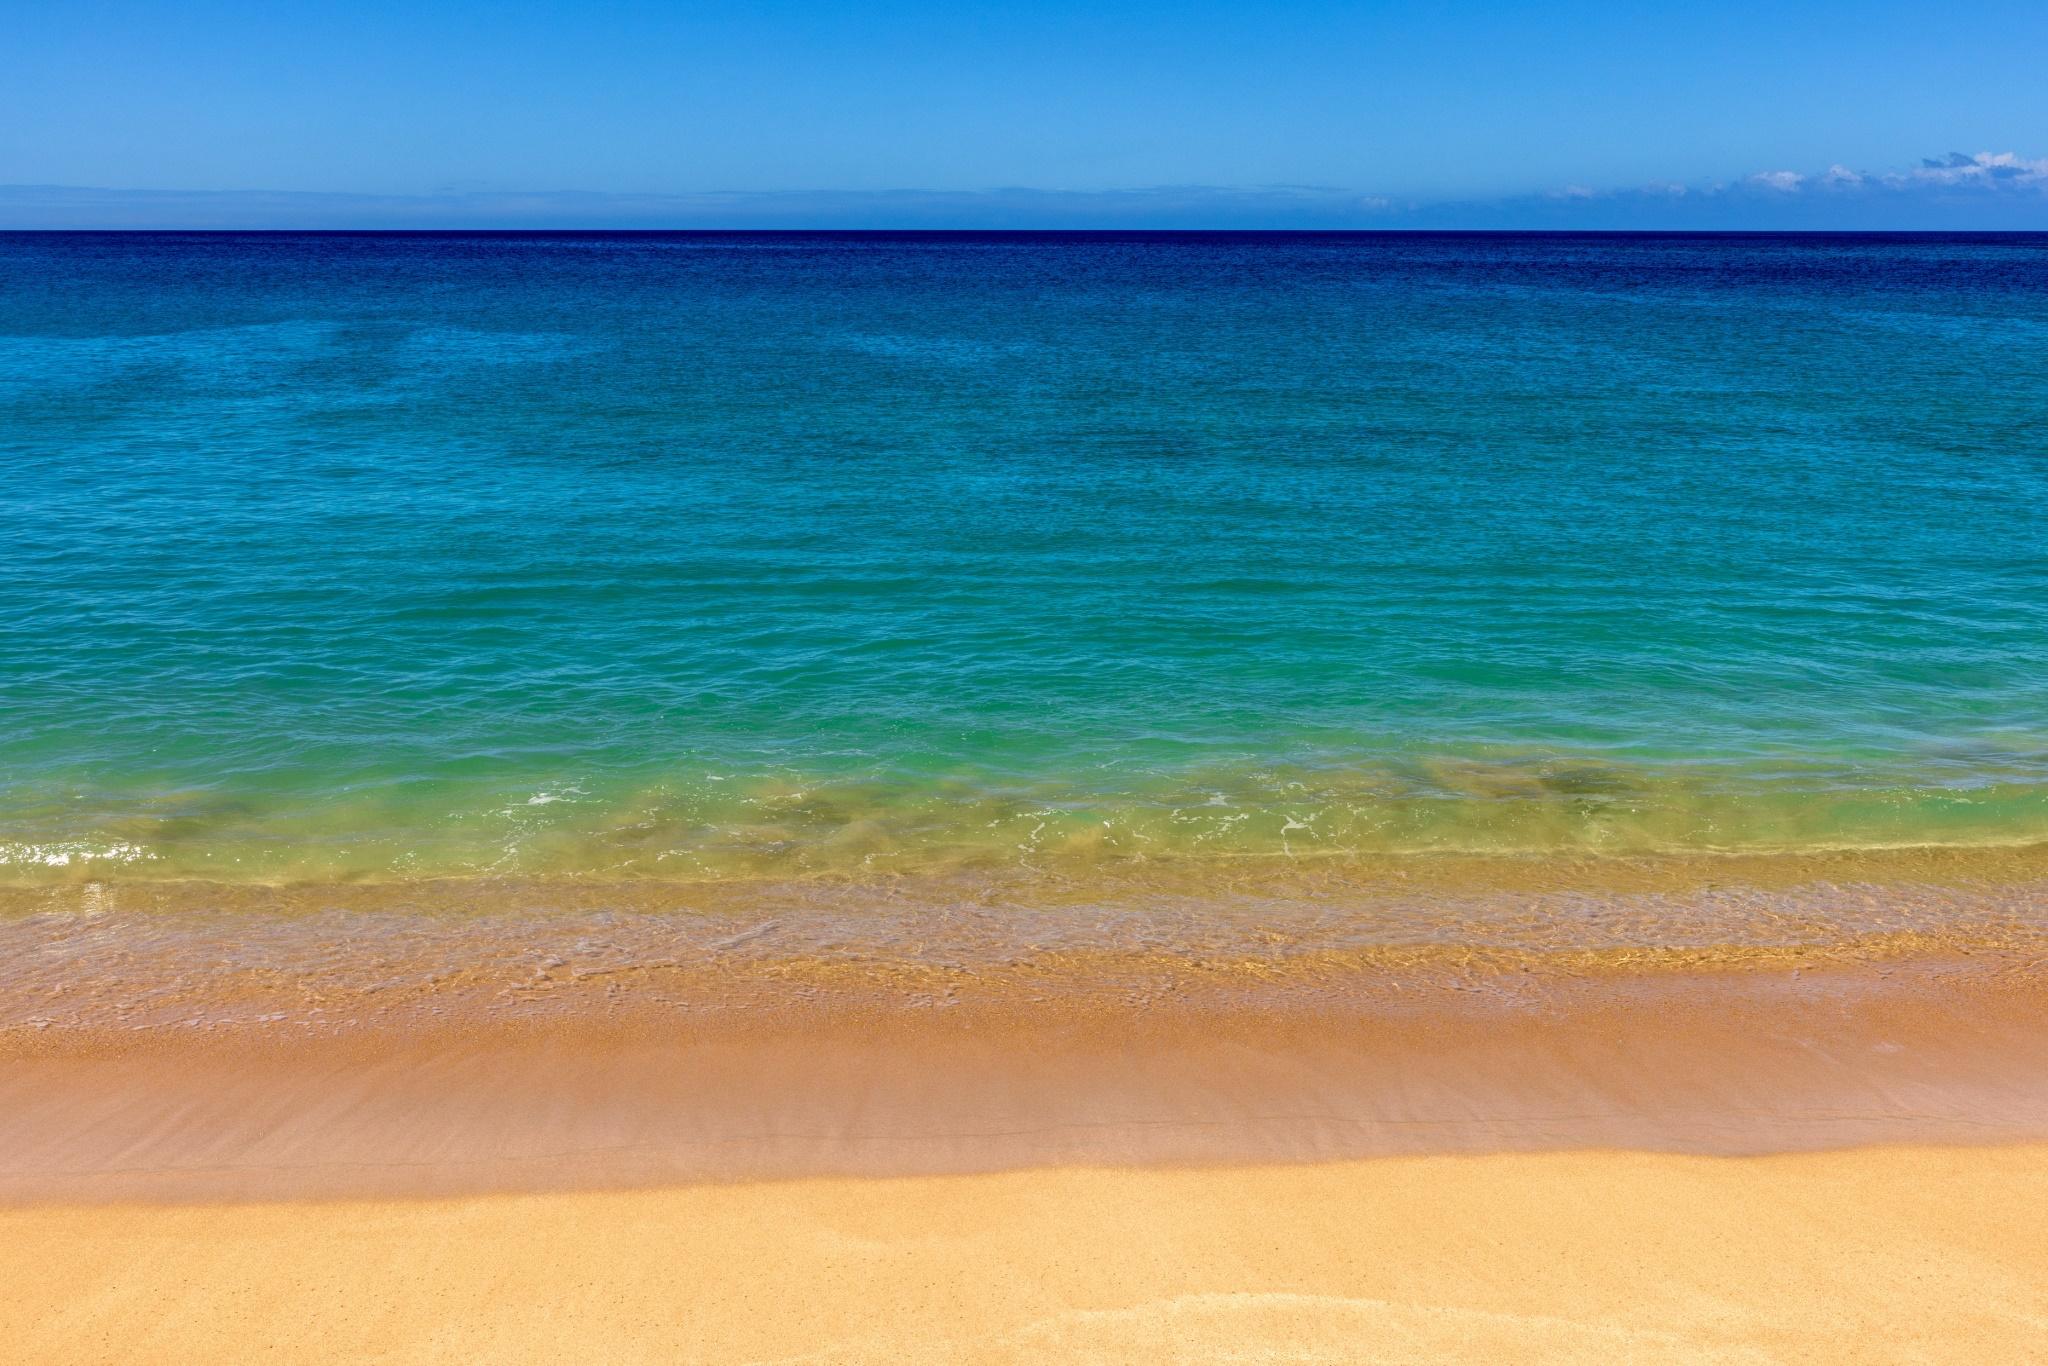 A Hawaiian beach in many layers of blue and tan.